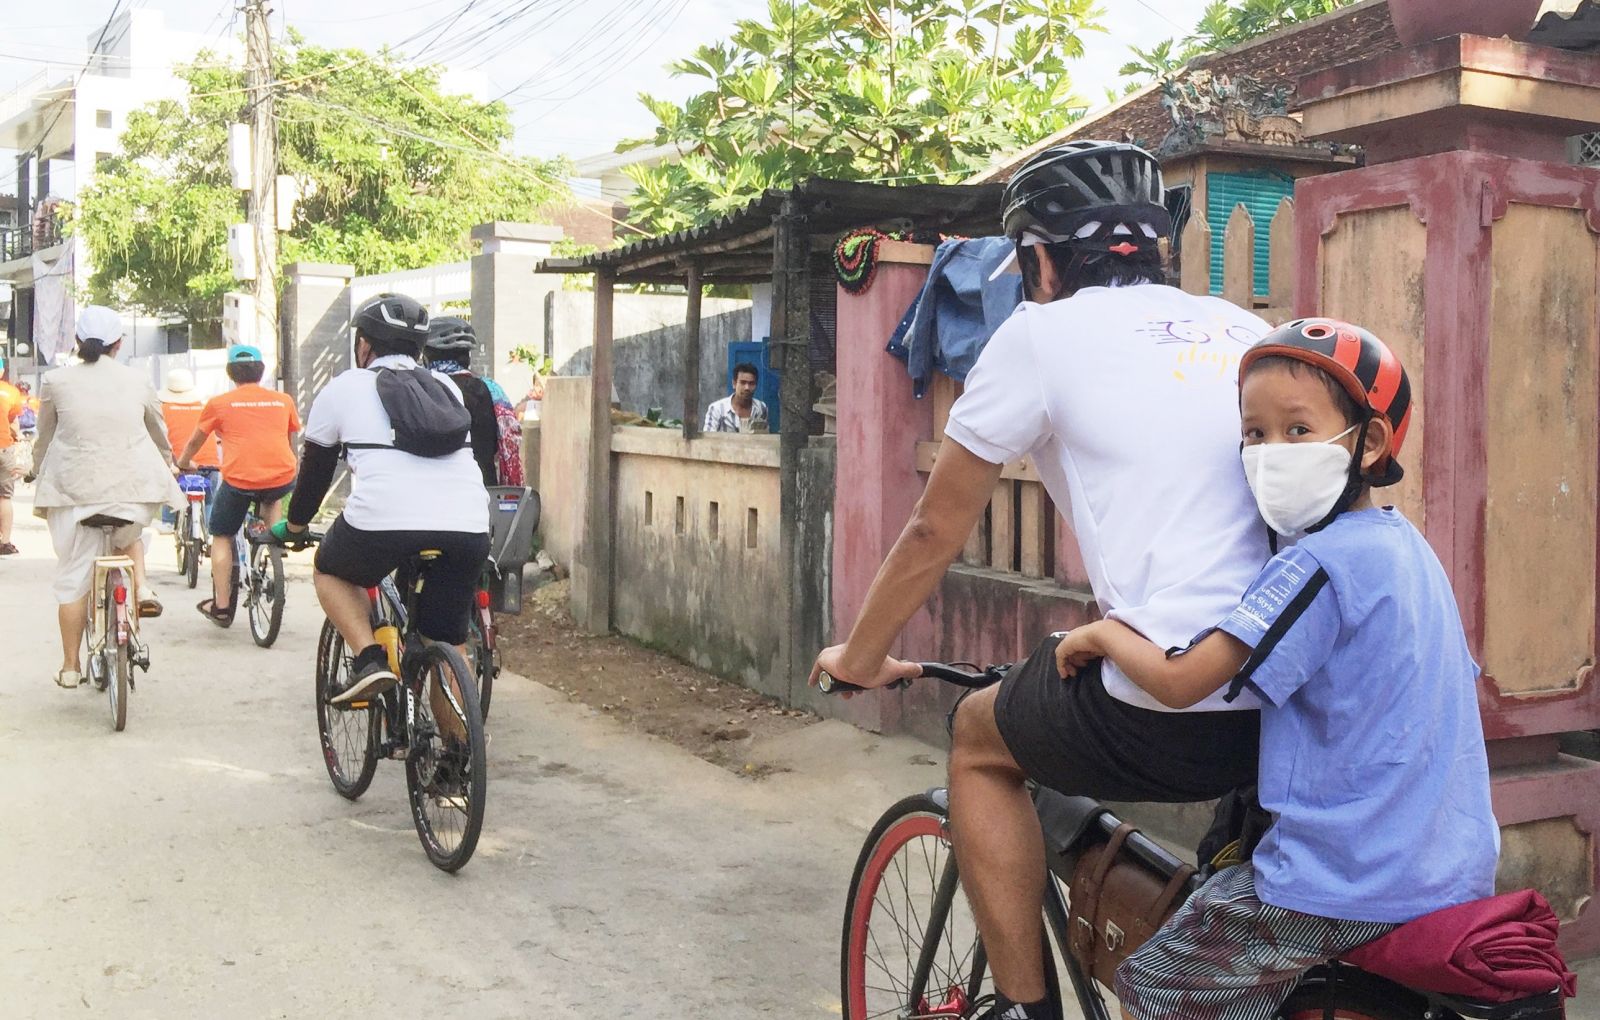 Although some children cannot cycle by themselves, they still go with their father in calling for environmental protection